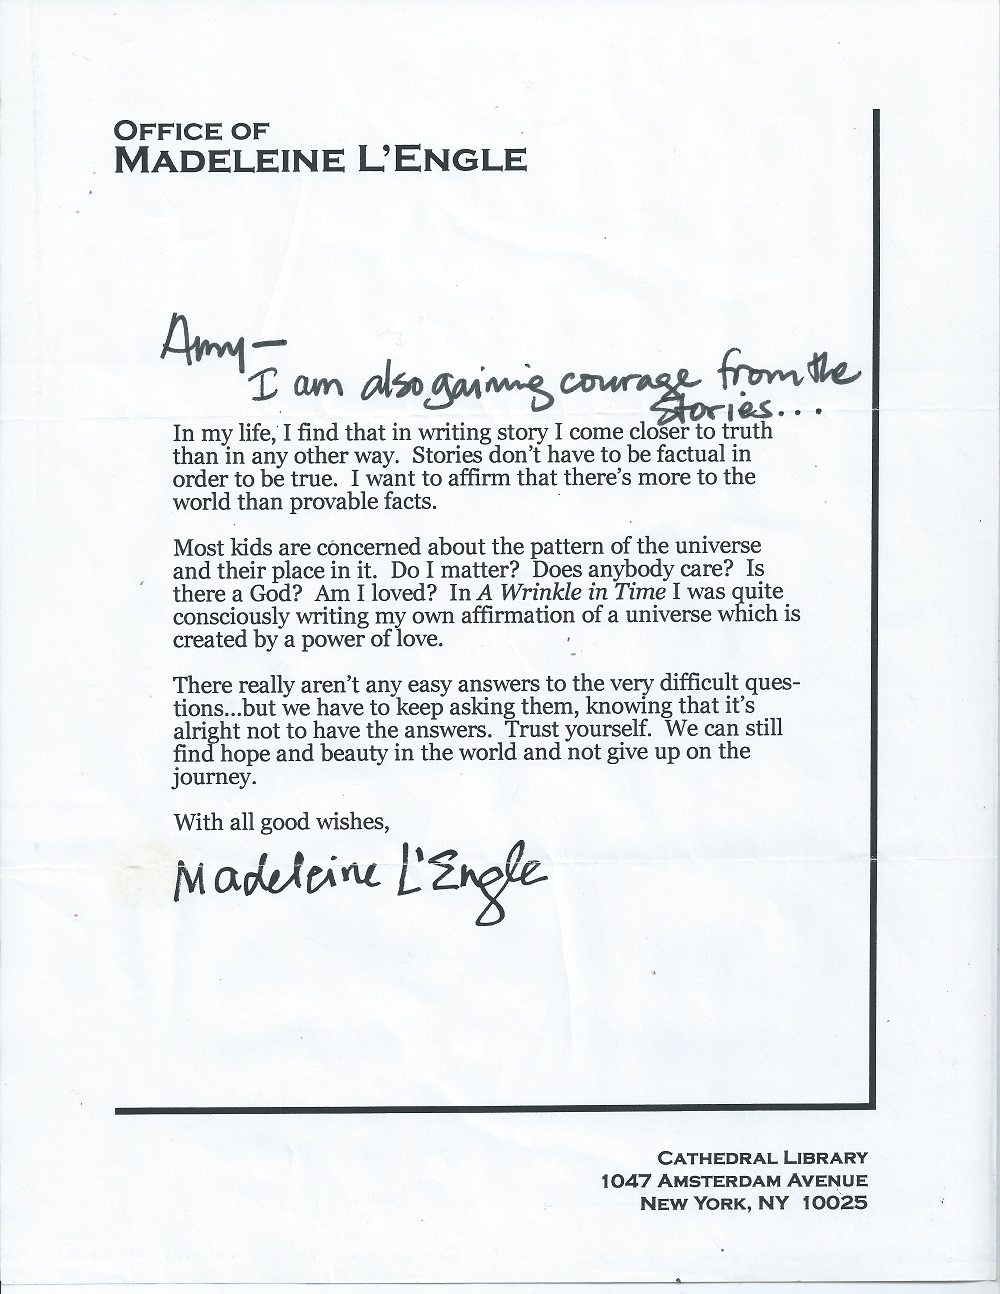 Letter from Madeleine Lengle as received by Amy Matviya in November 2001